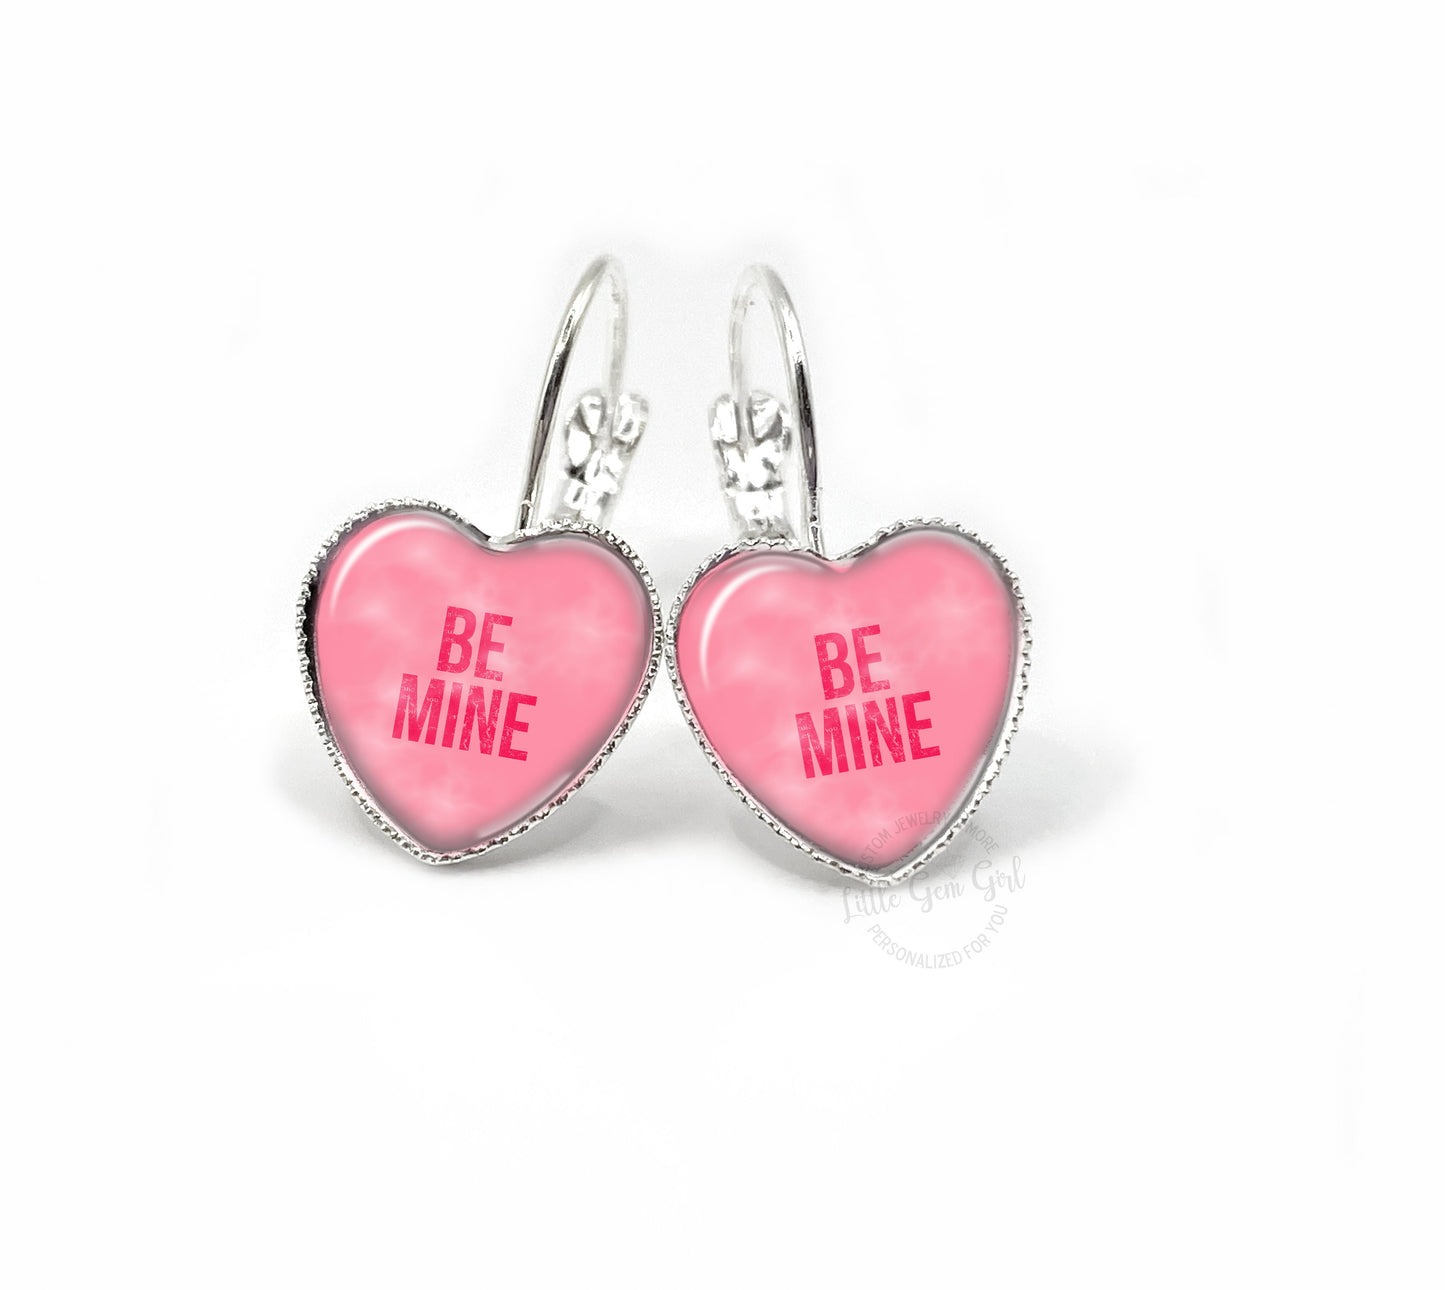 Valentine's Day Conversation Heart Earrings with Your Custom Text - Available in Silver, Stainless Steel, or Titanium